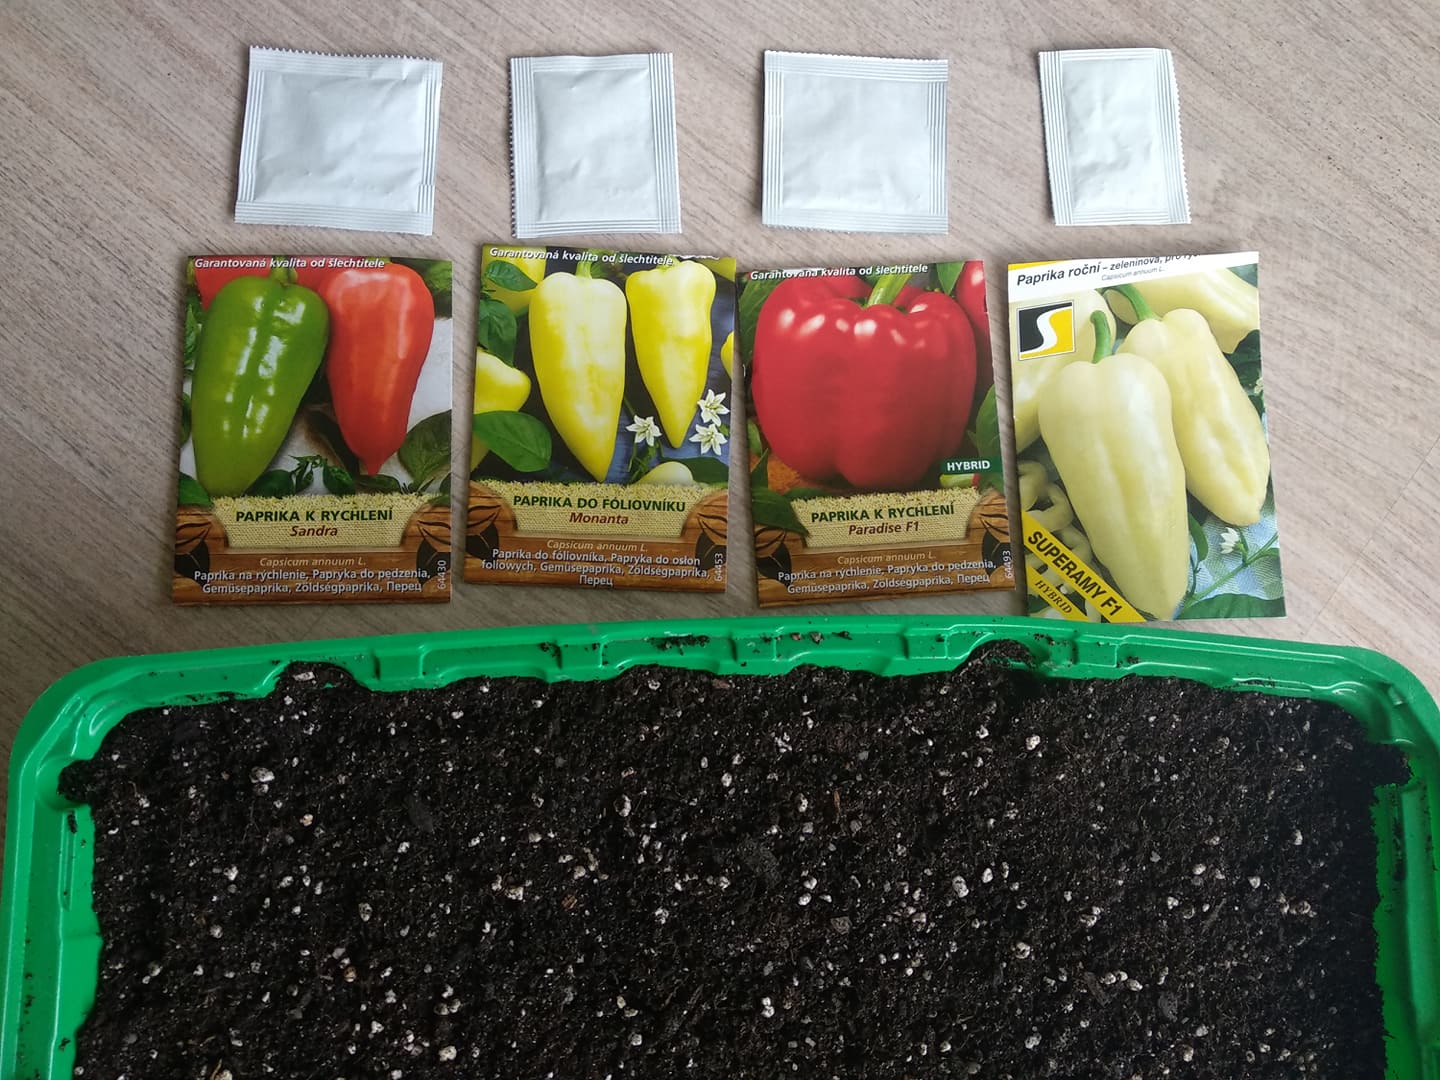 Sowing peppers